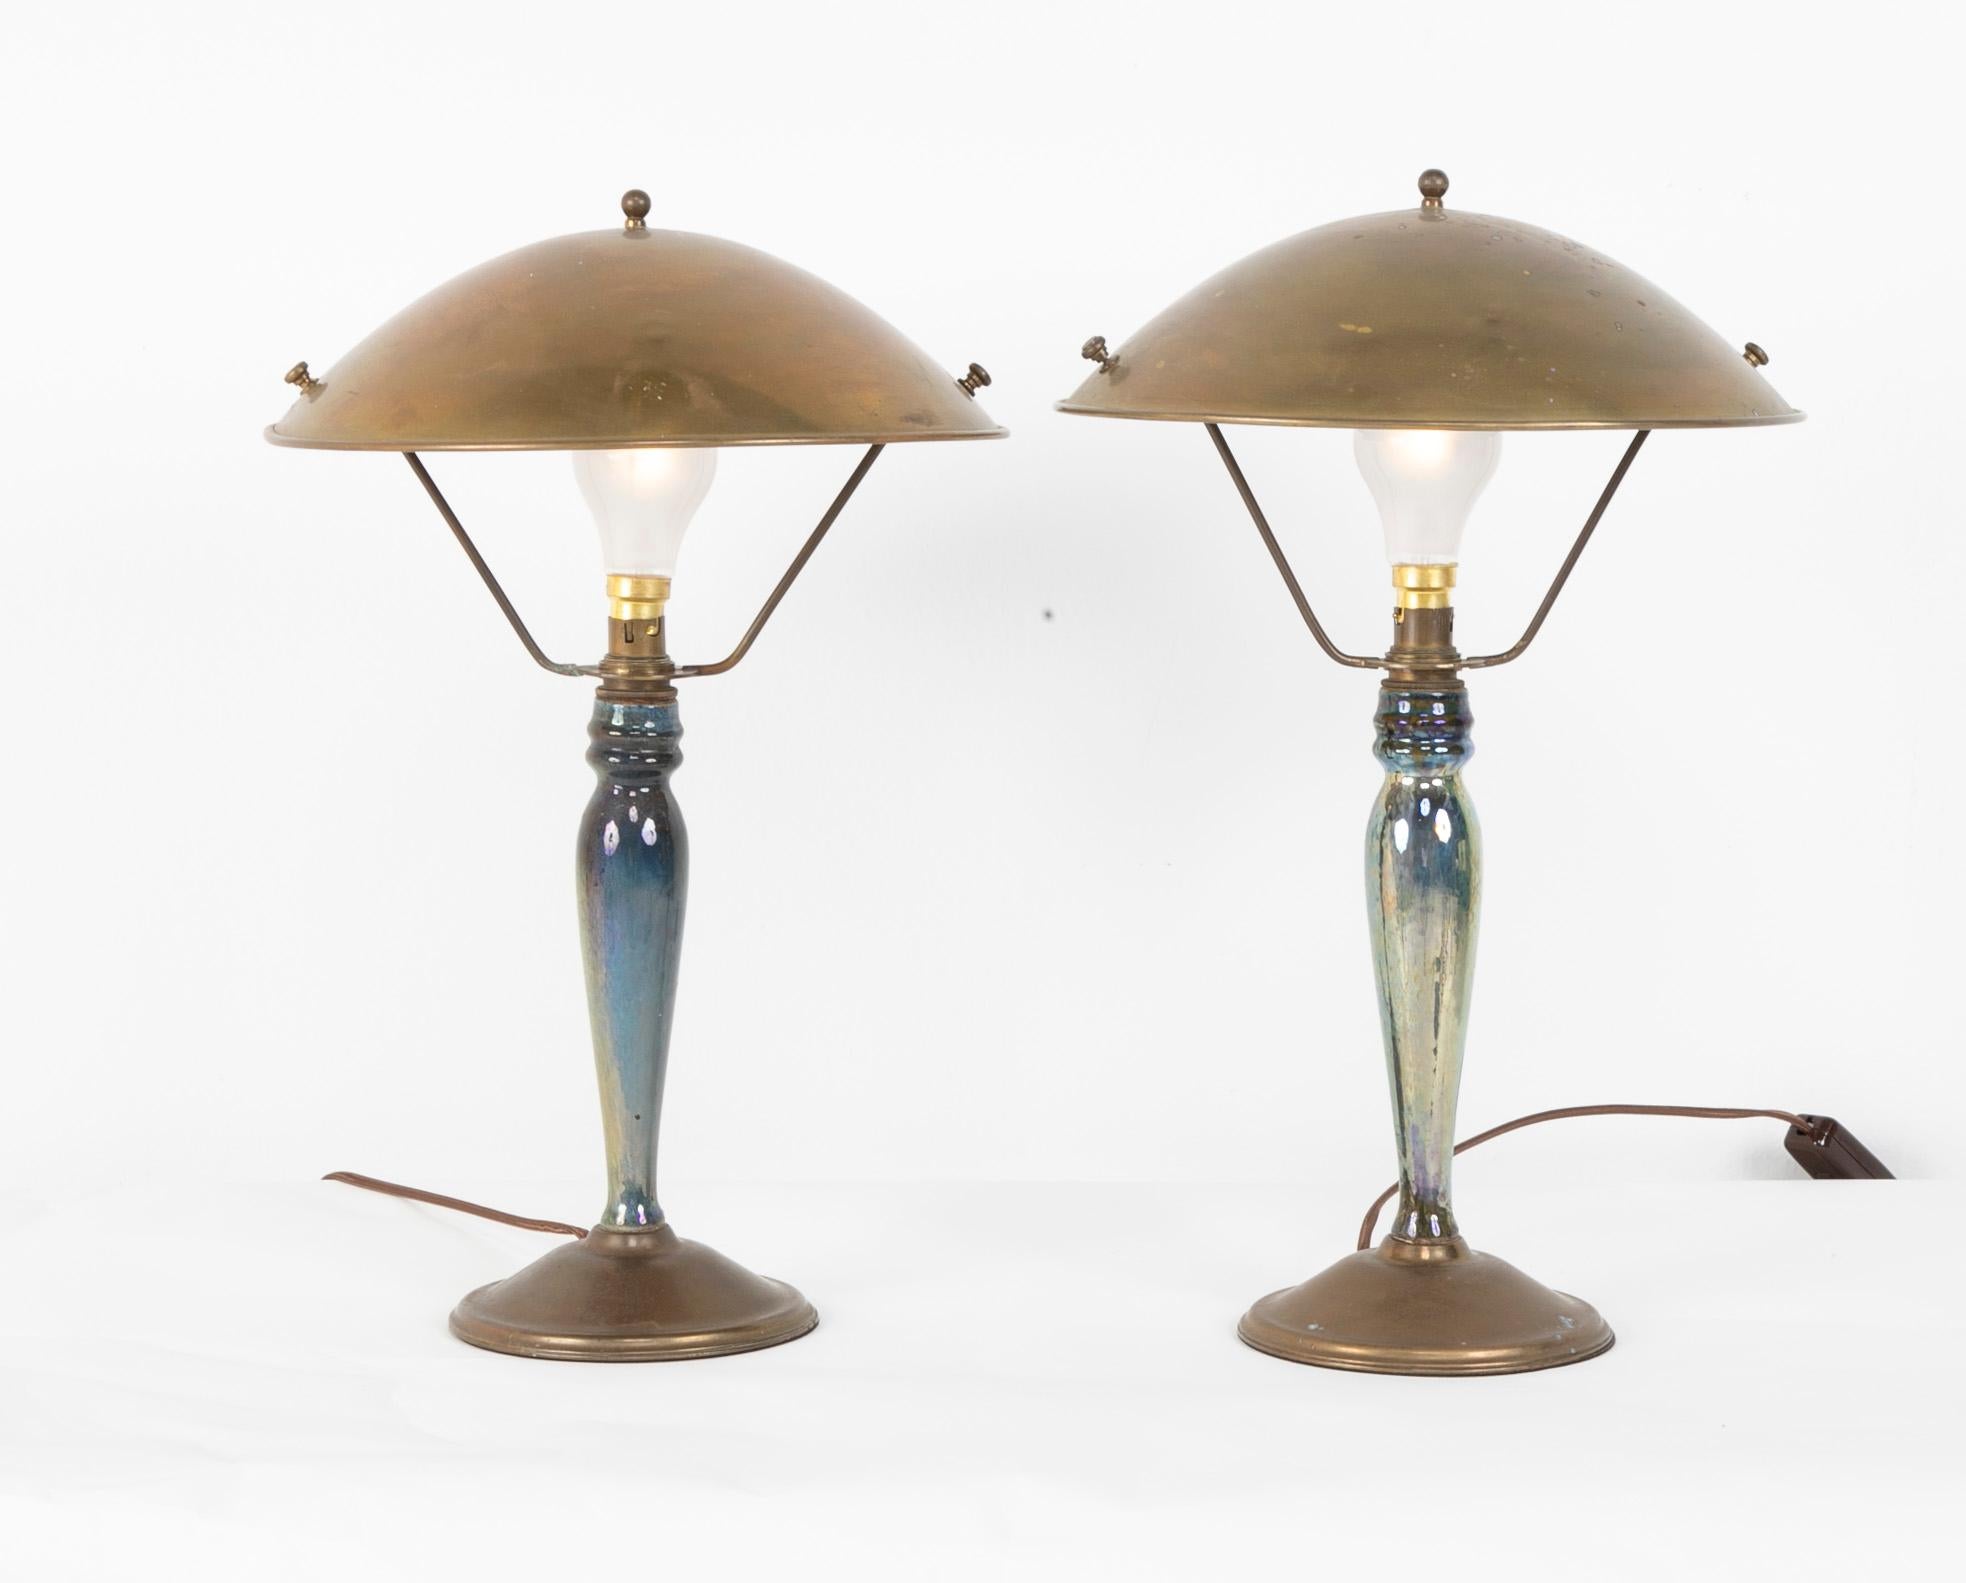 Ceramic Pair of Mid-20th Century French Blue Glazed Earthenware Lamps with Metal Shades